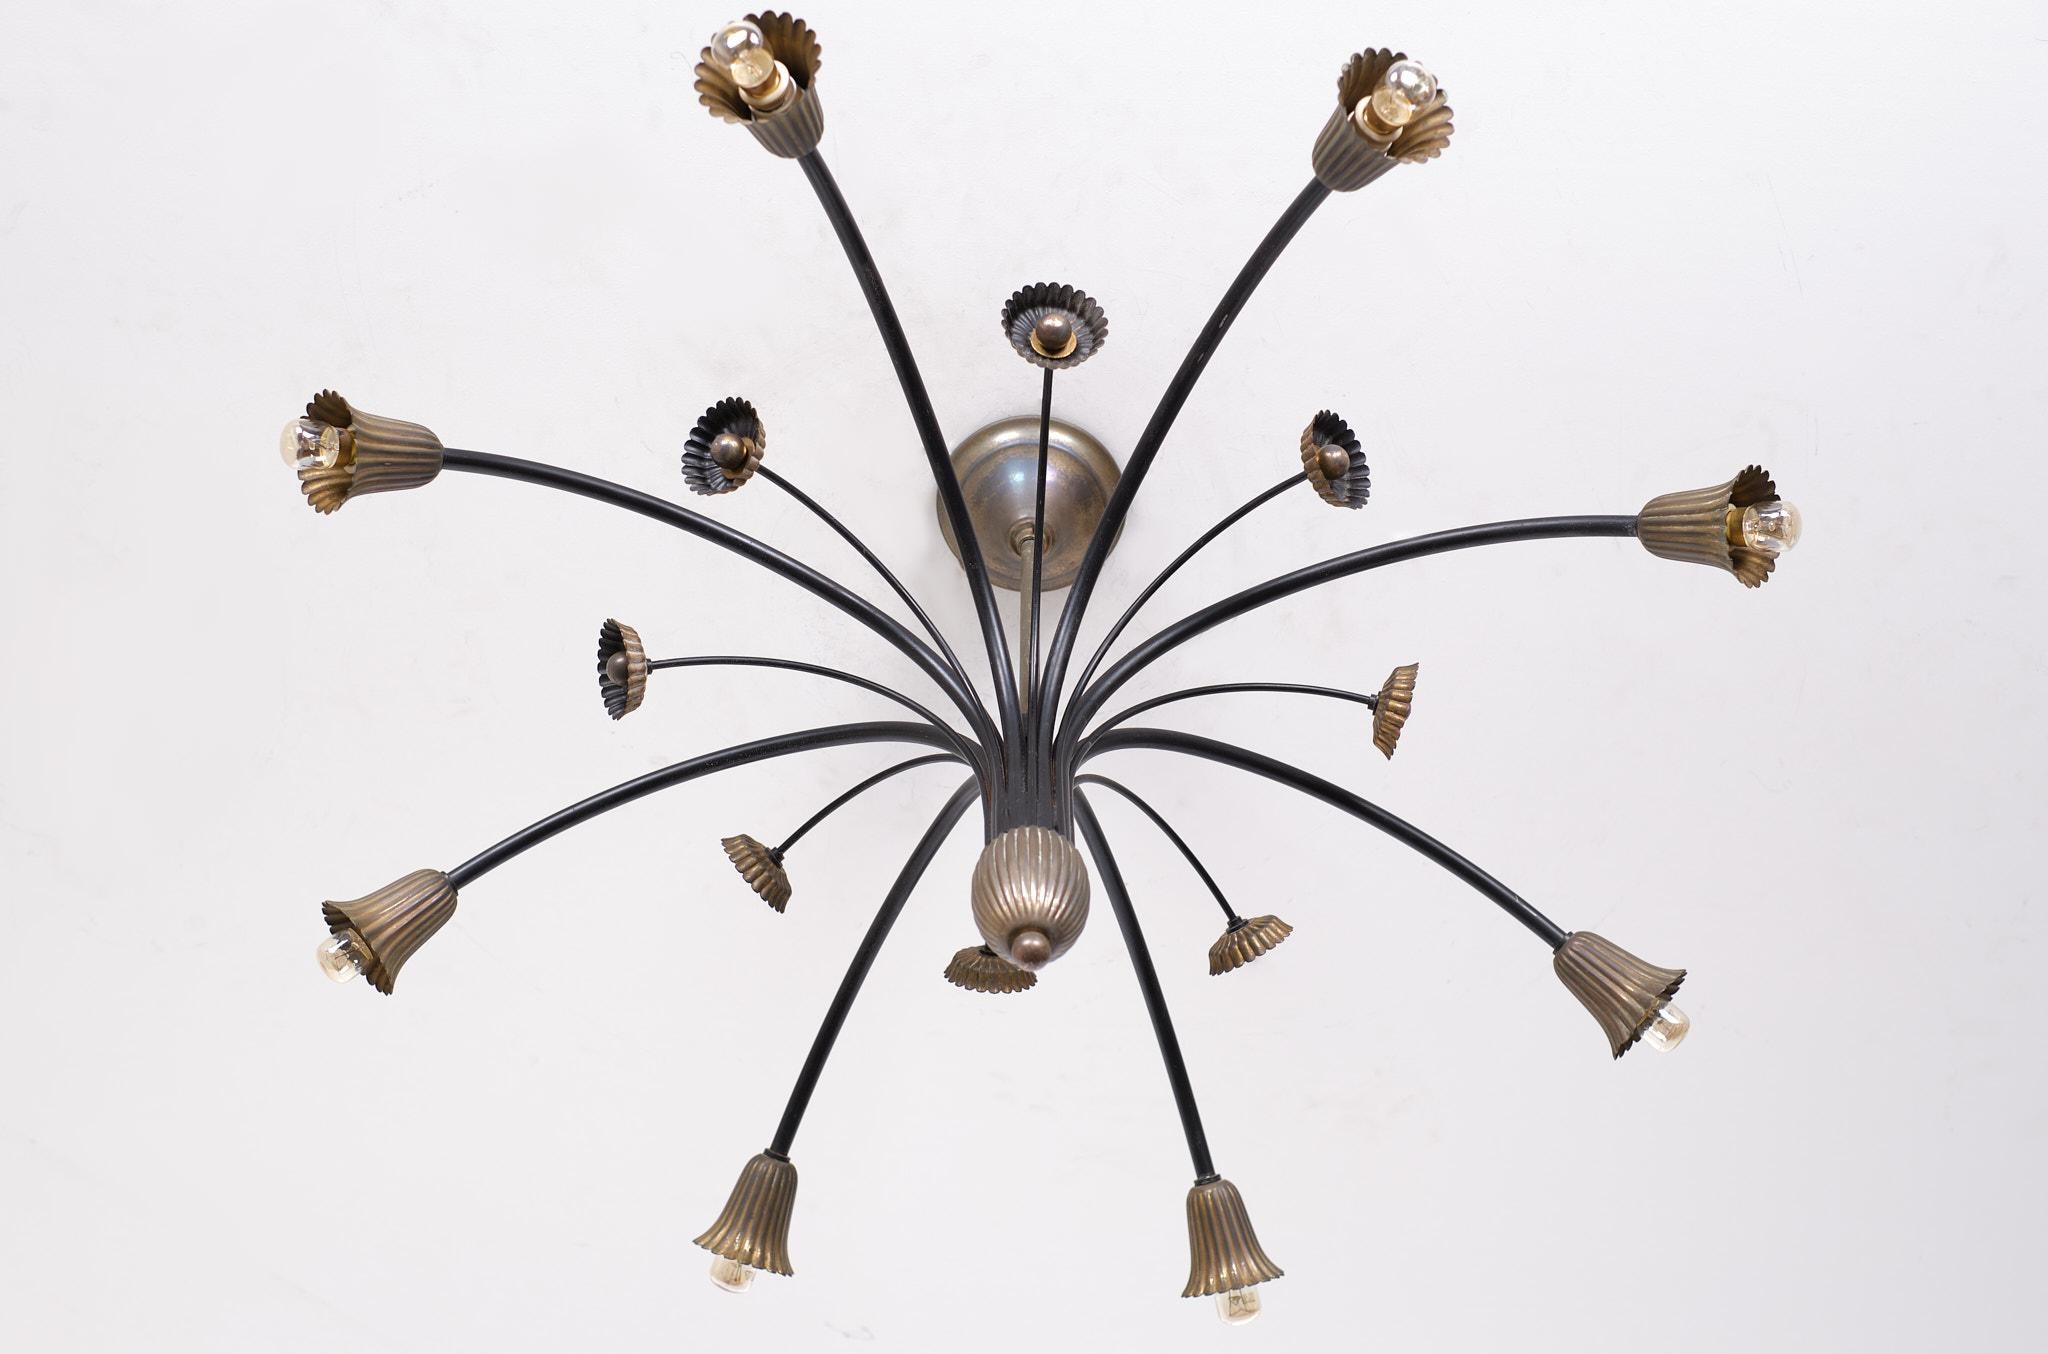 Love this spider chandelier, so typical Italian fifties, 8 arms with light 
7 Rosebud arms, Good working condition. Small sockets bulb included.